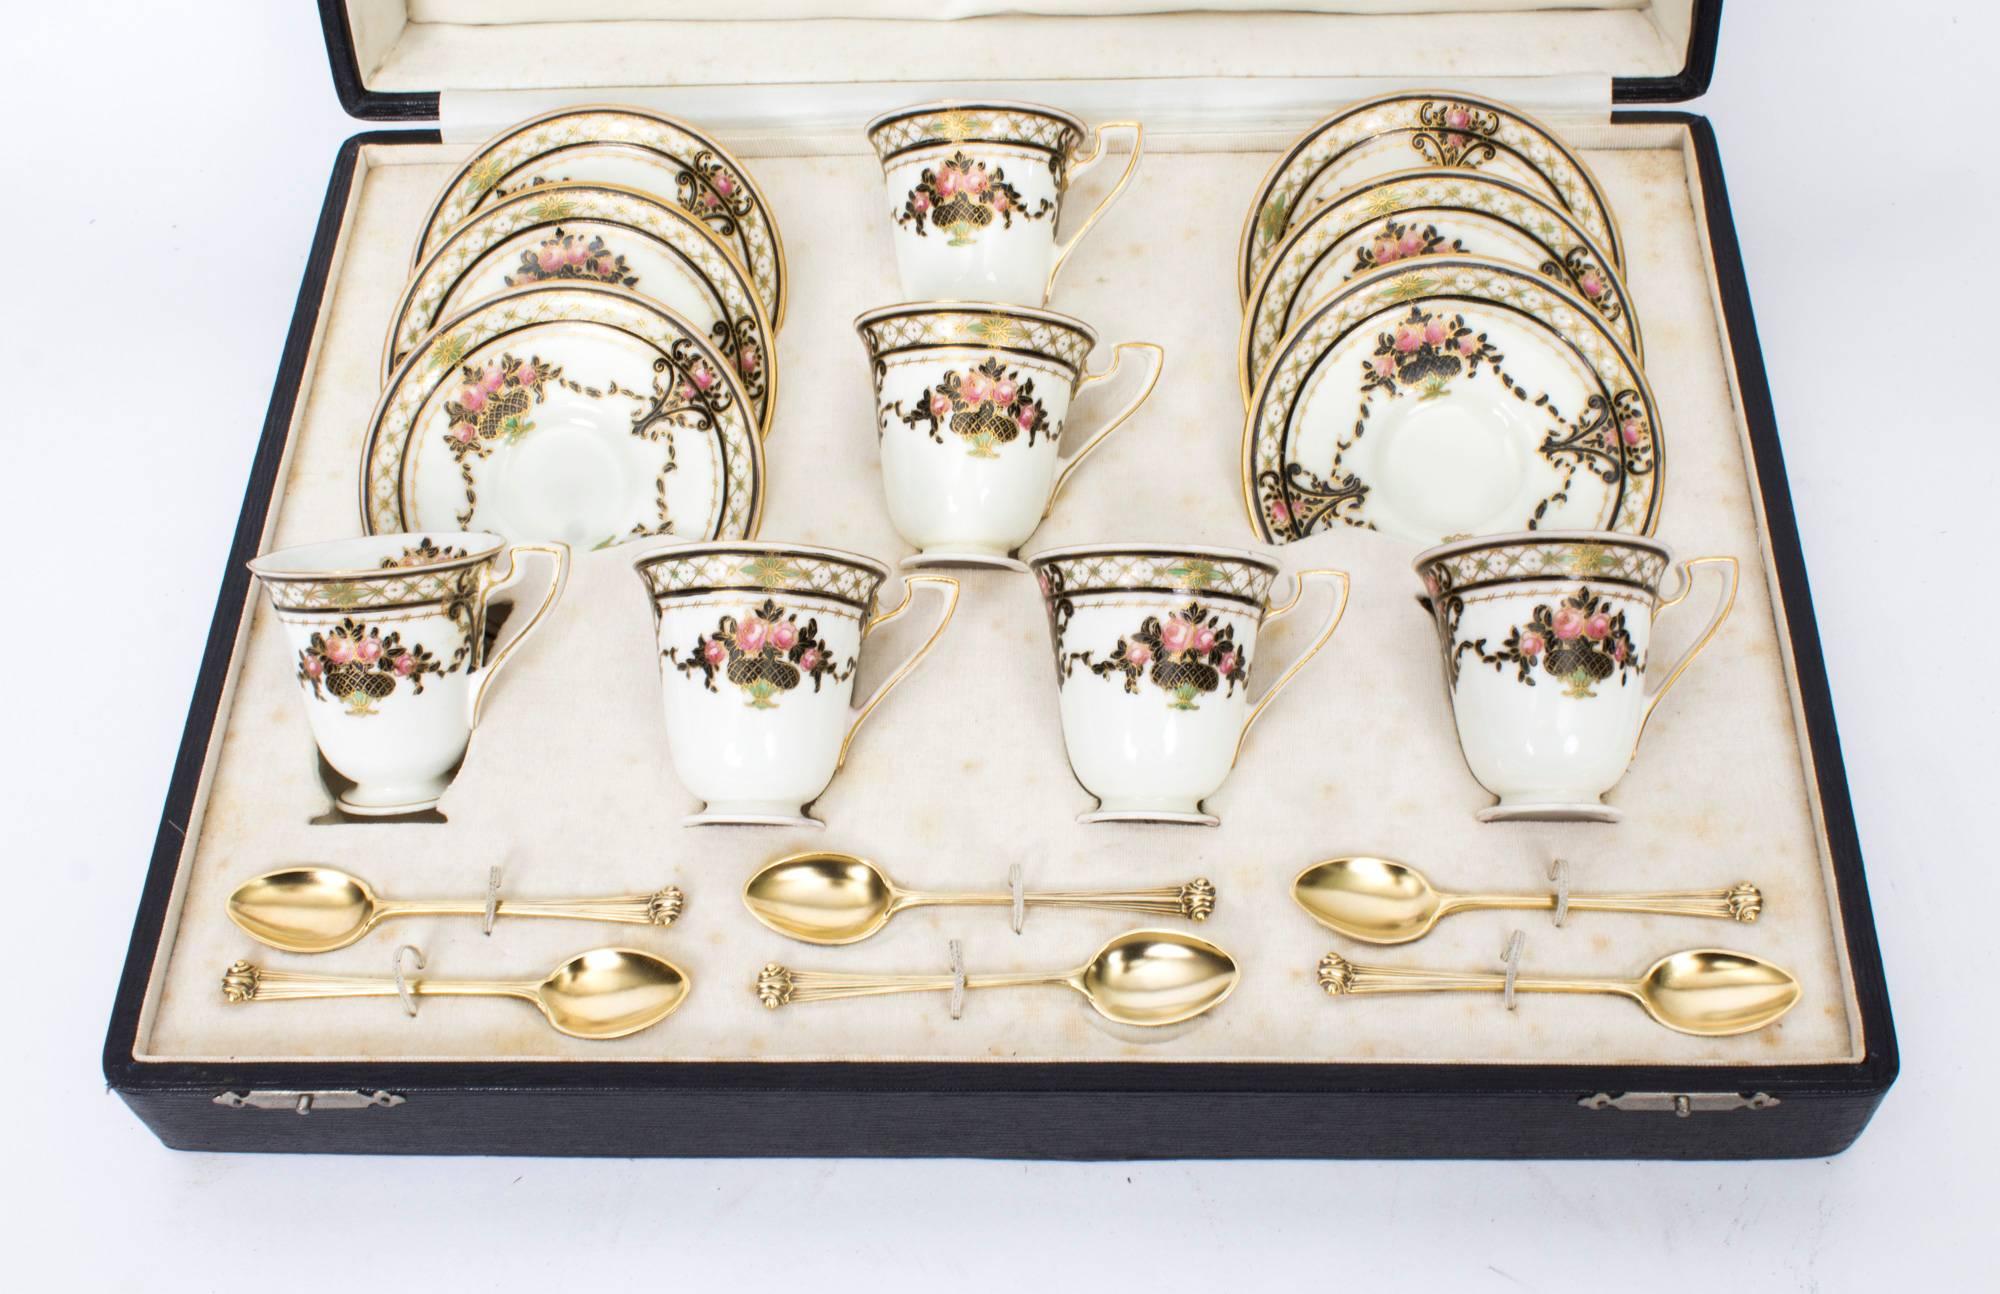 This is a lovely antique Royal Worcester porcelain coffee set with date code for 1915.

The timeless Classic Worcester design of this service is decorated with vases of roses and a trellis border finished in blue and gold with the Royal Worcester